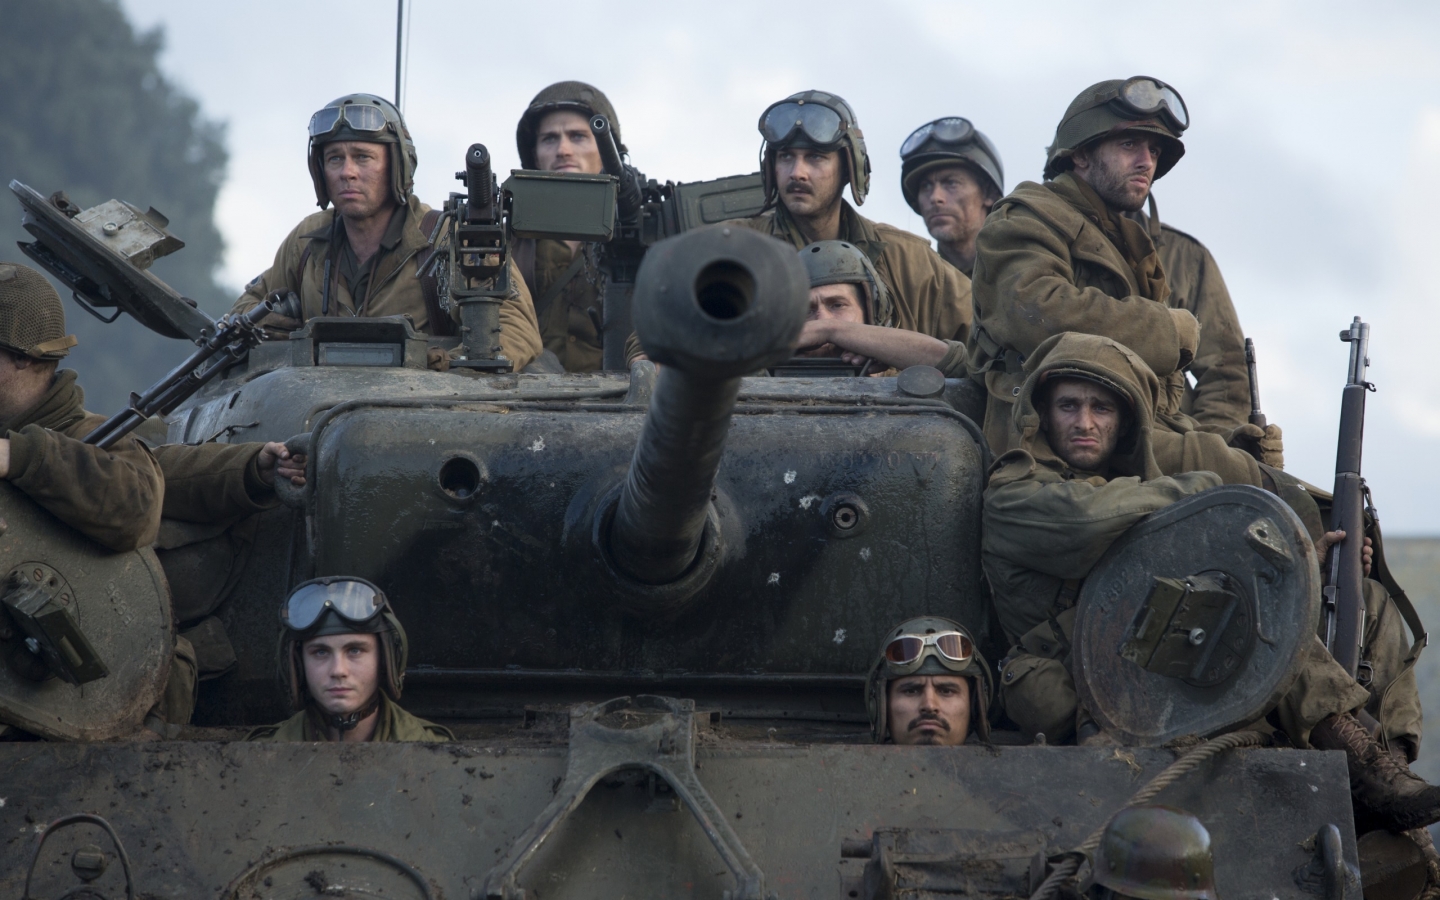 Fury Movie 2014 for 1440 x 900 widescreen resolution